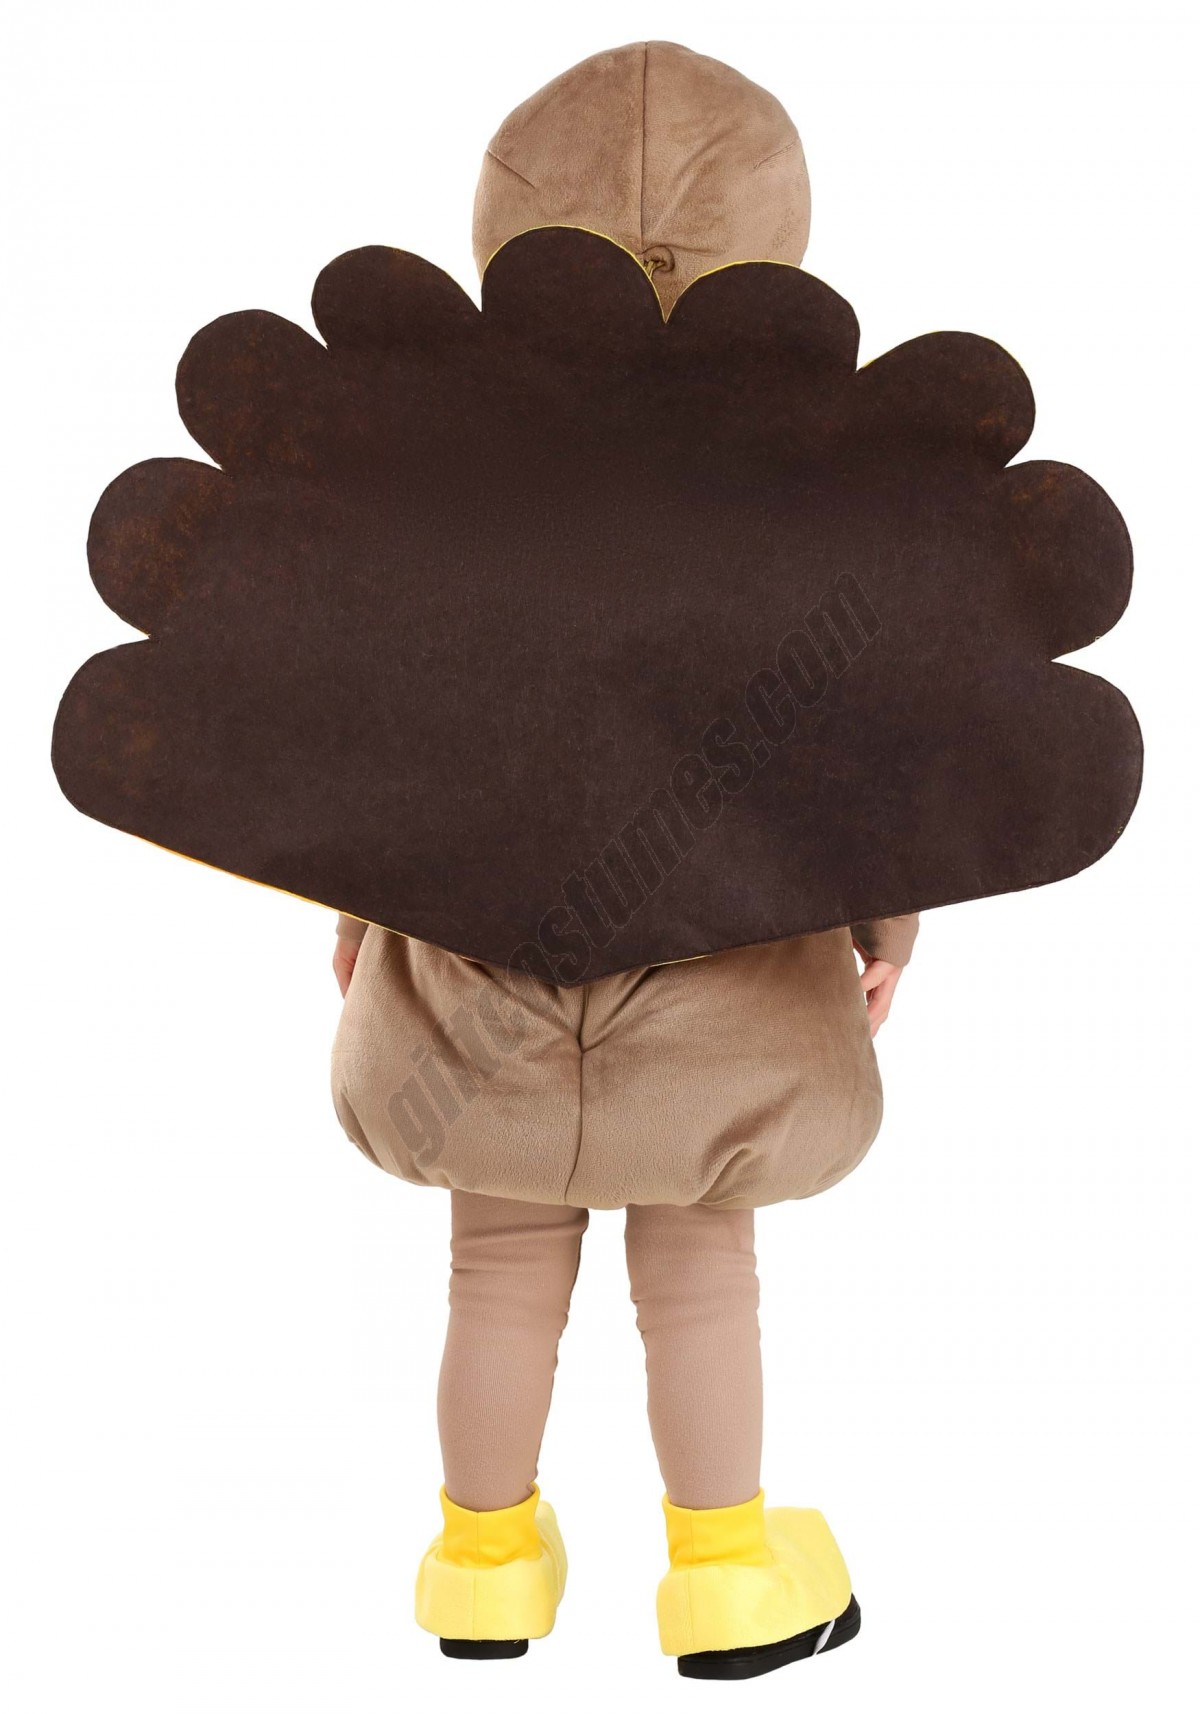 Crafty Turkey Toddler Costume Promotions - -1